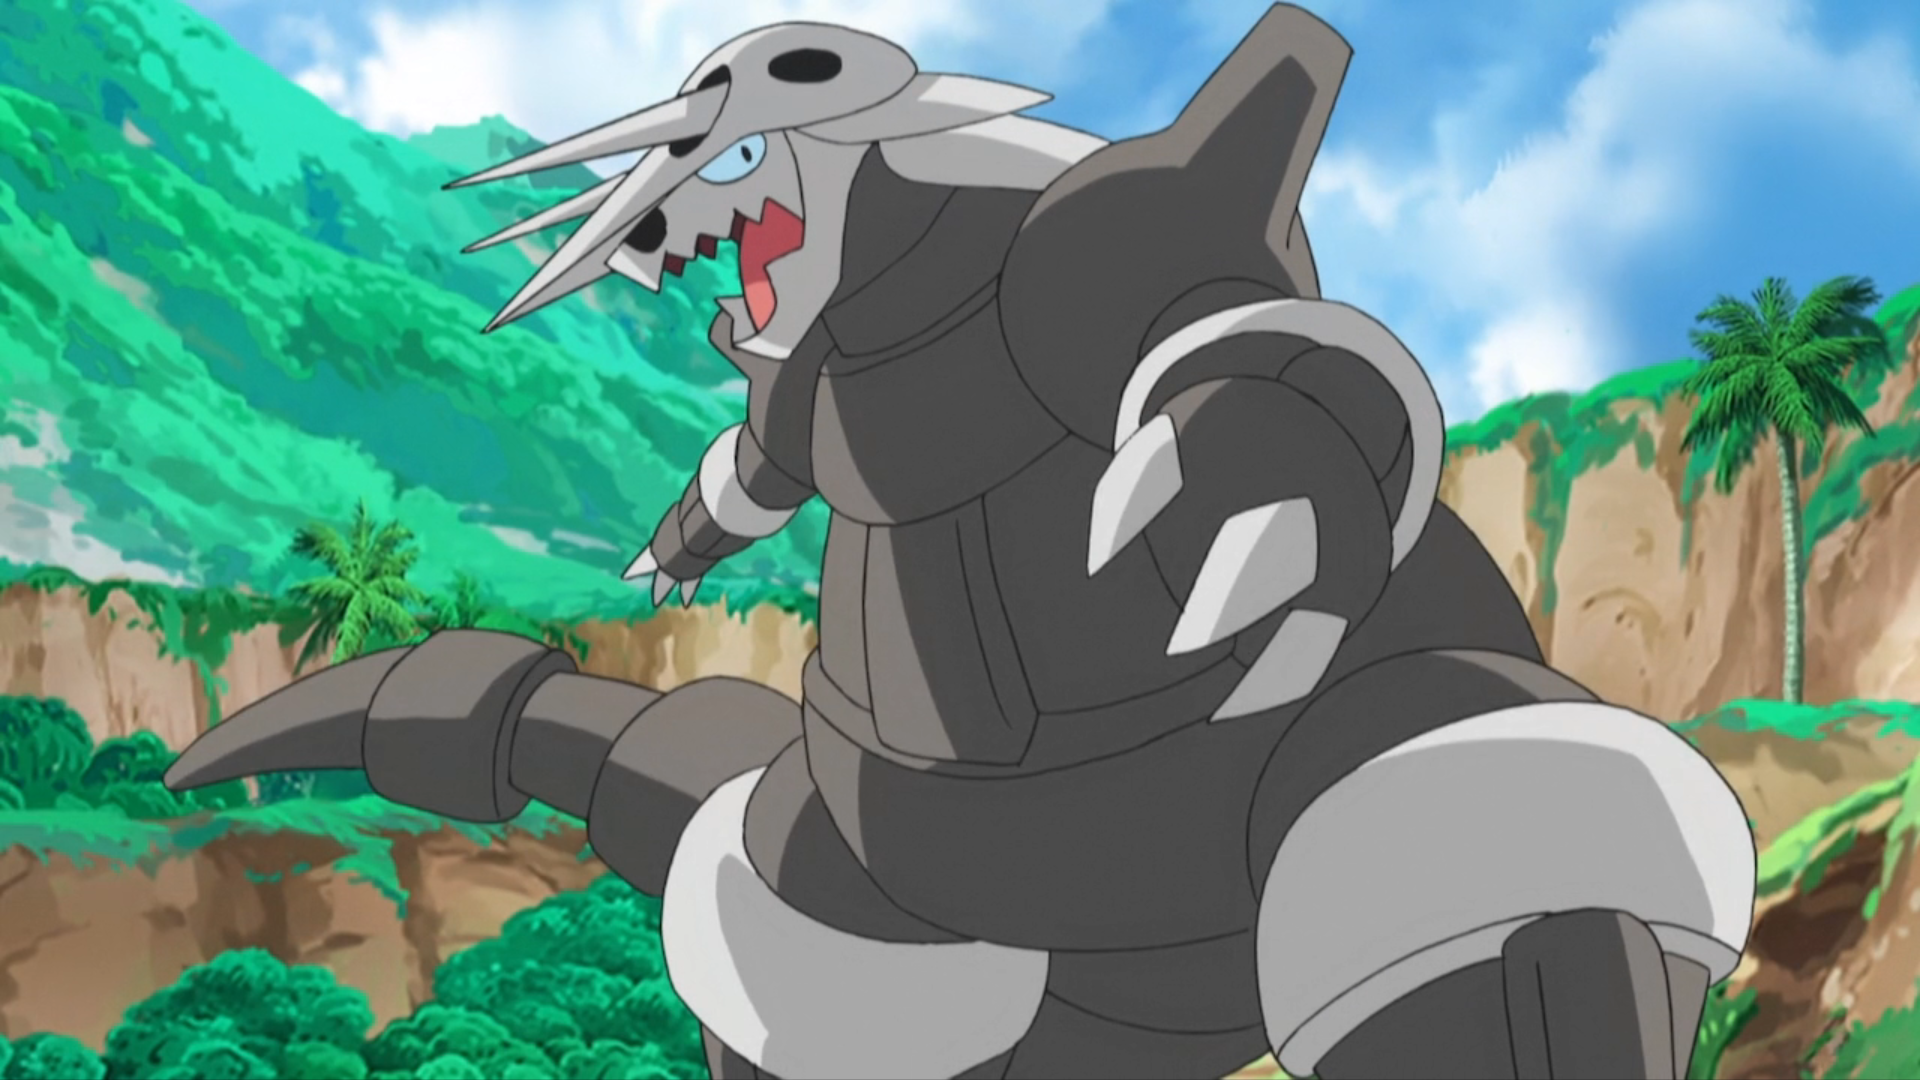 This Aggron is a Steel/Rock-type Pokémon owned by Gozu. 